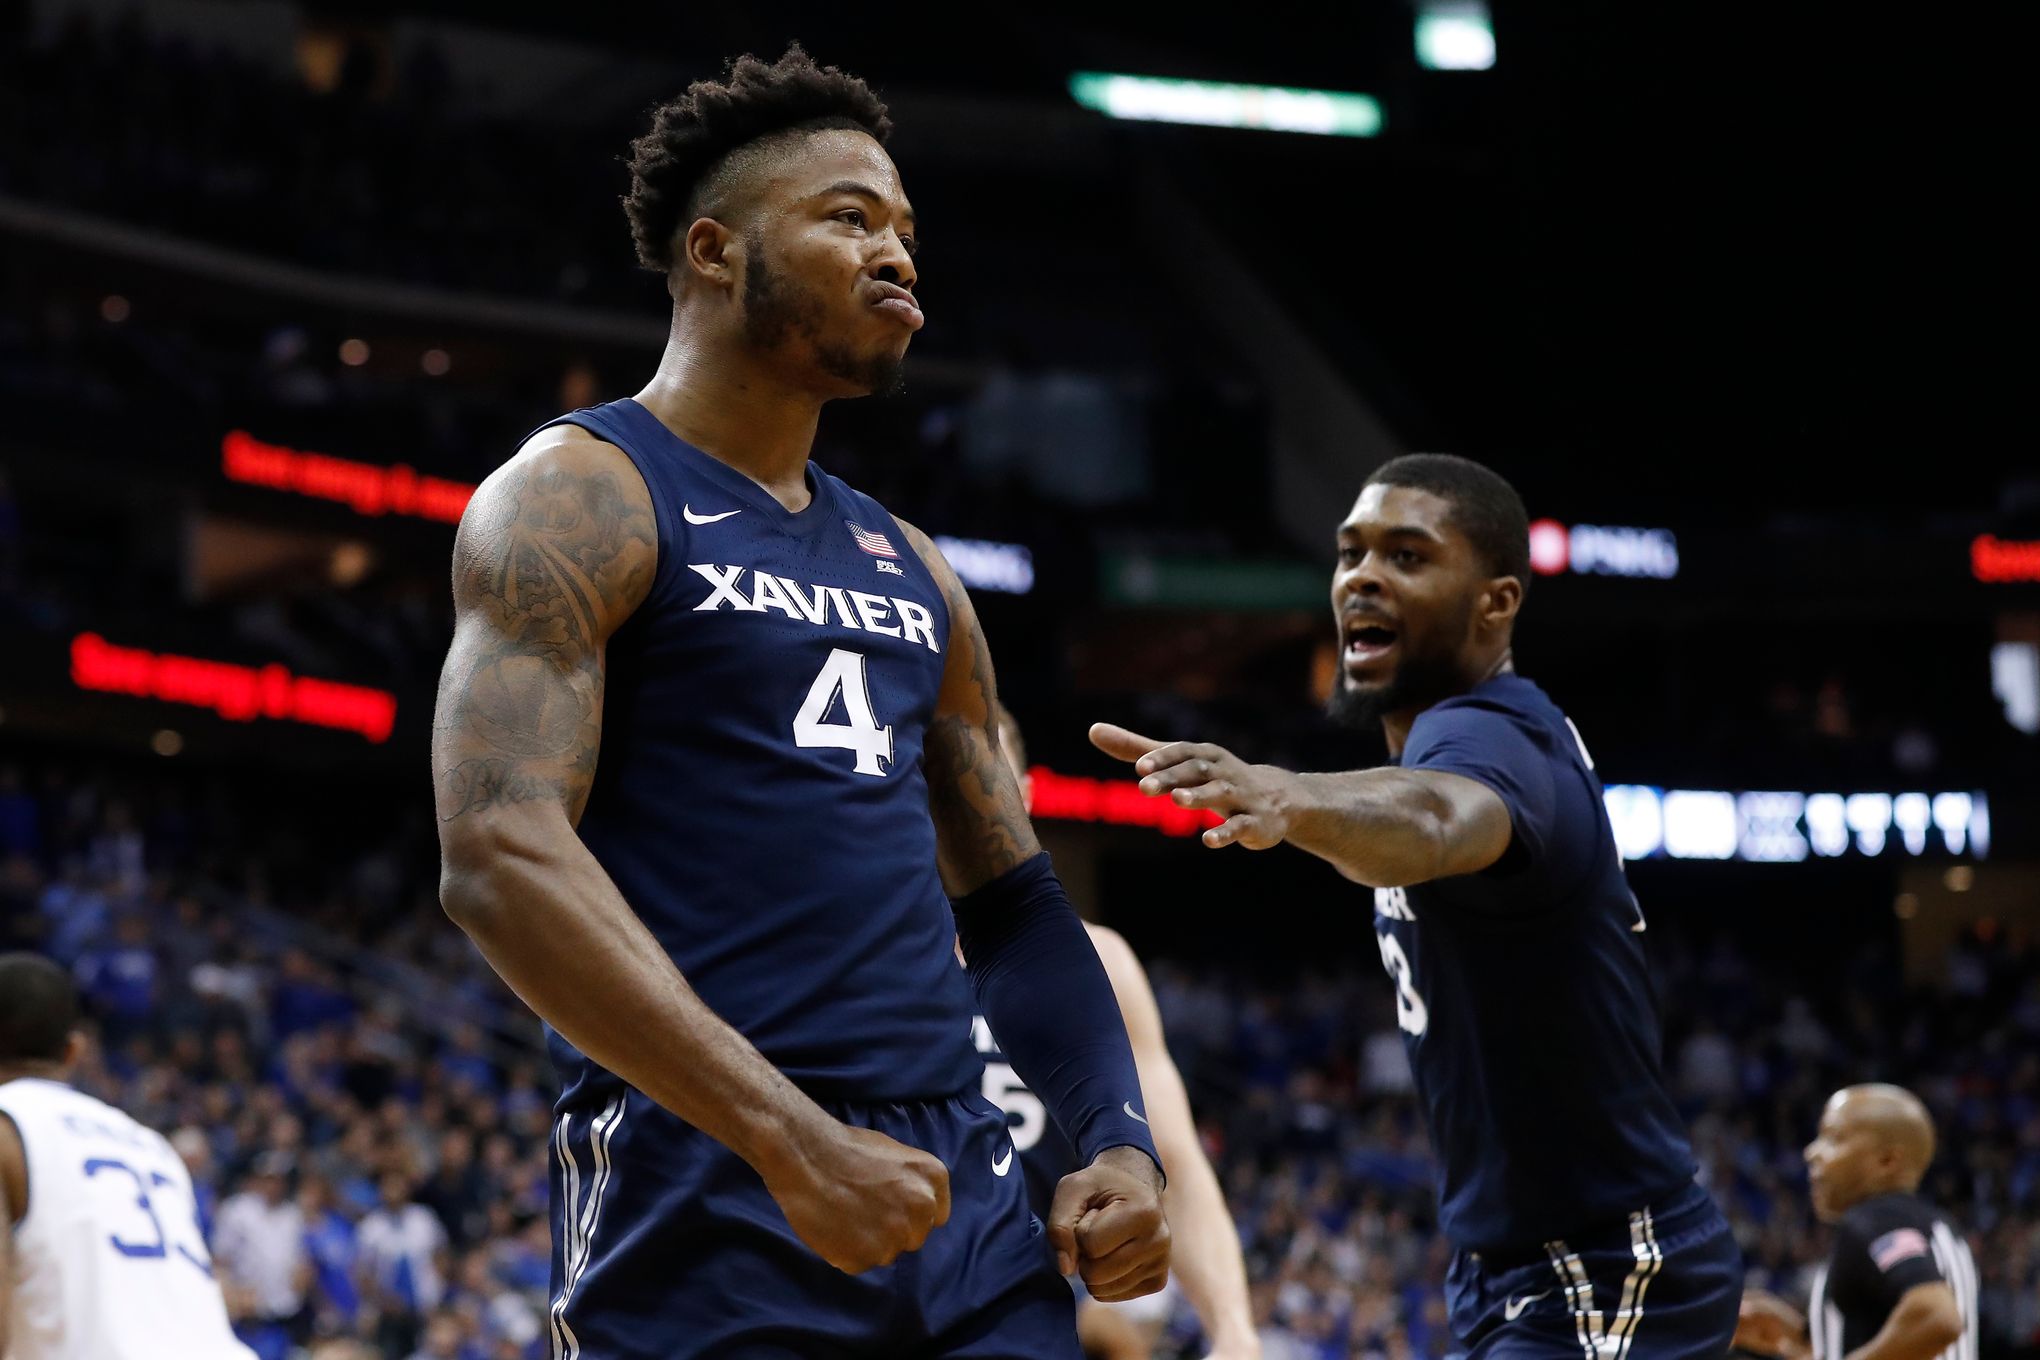 Myles Powell: Seton Hall could've made March Madness run